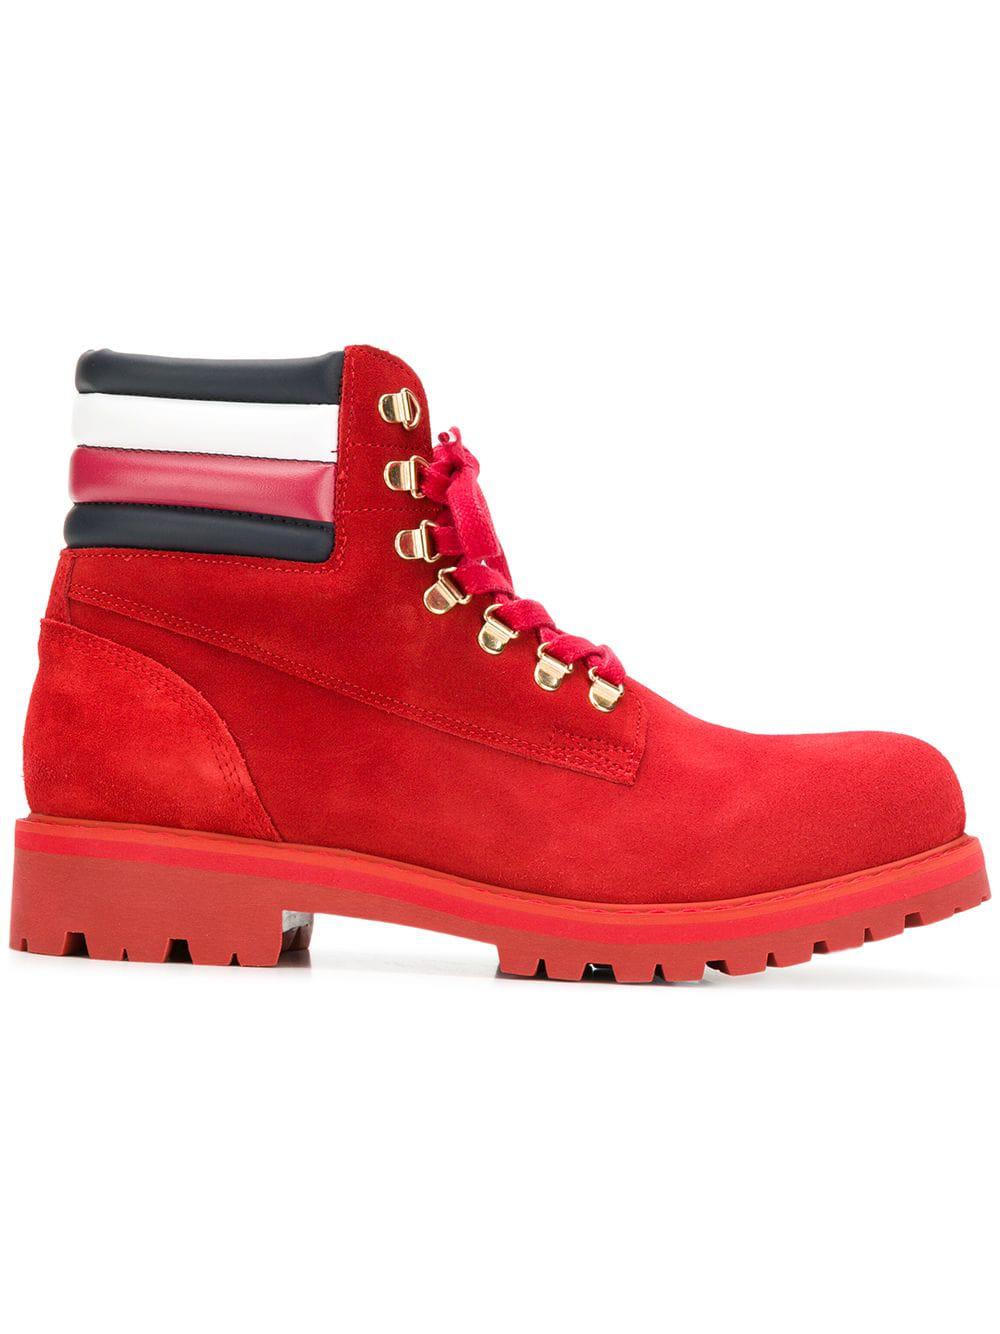 Tommy Hilfiger Cotton Lewis Hamilton Suede Hiking Boots in Red for Men -  Lyst